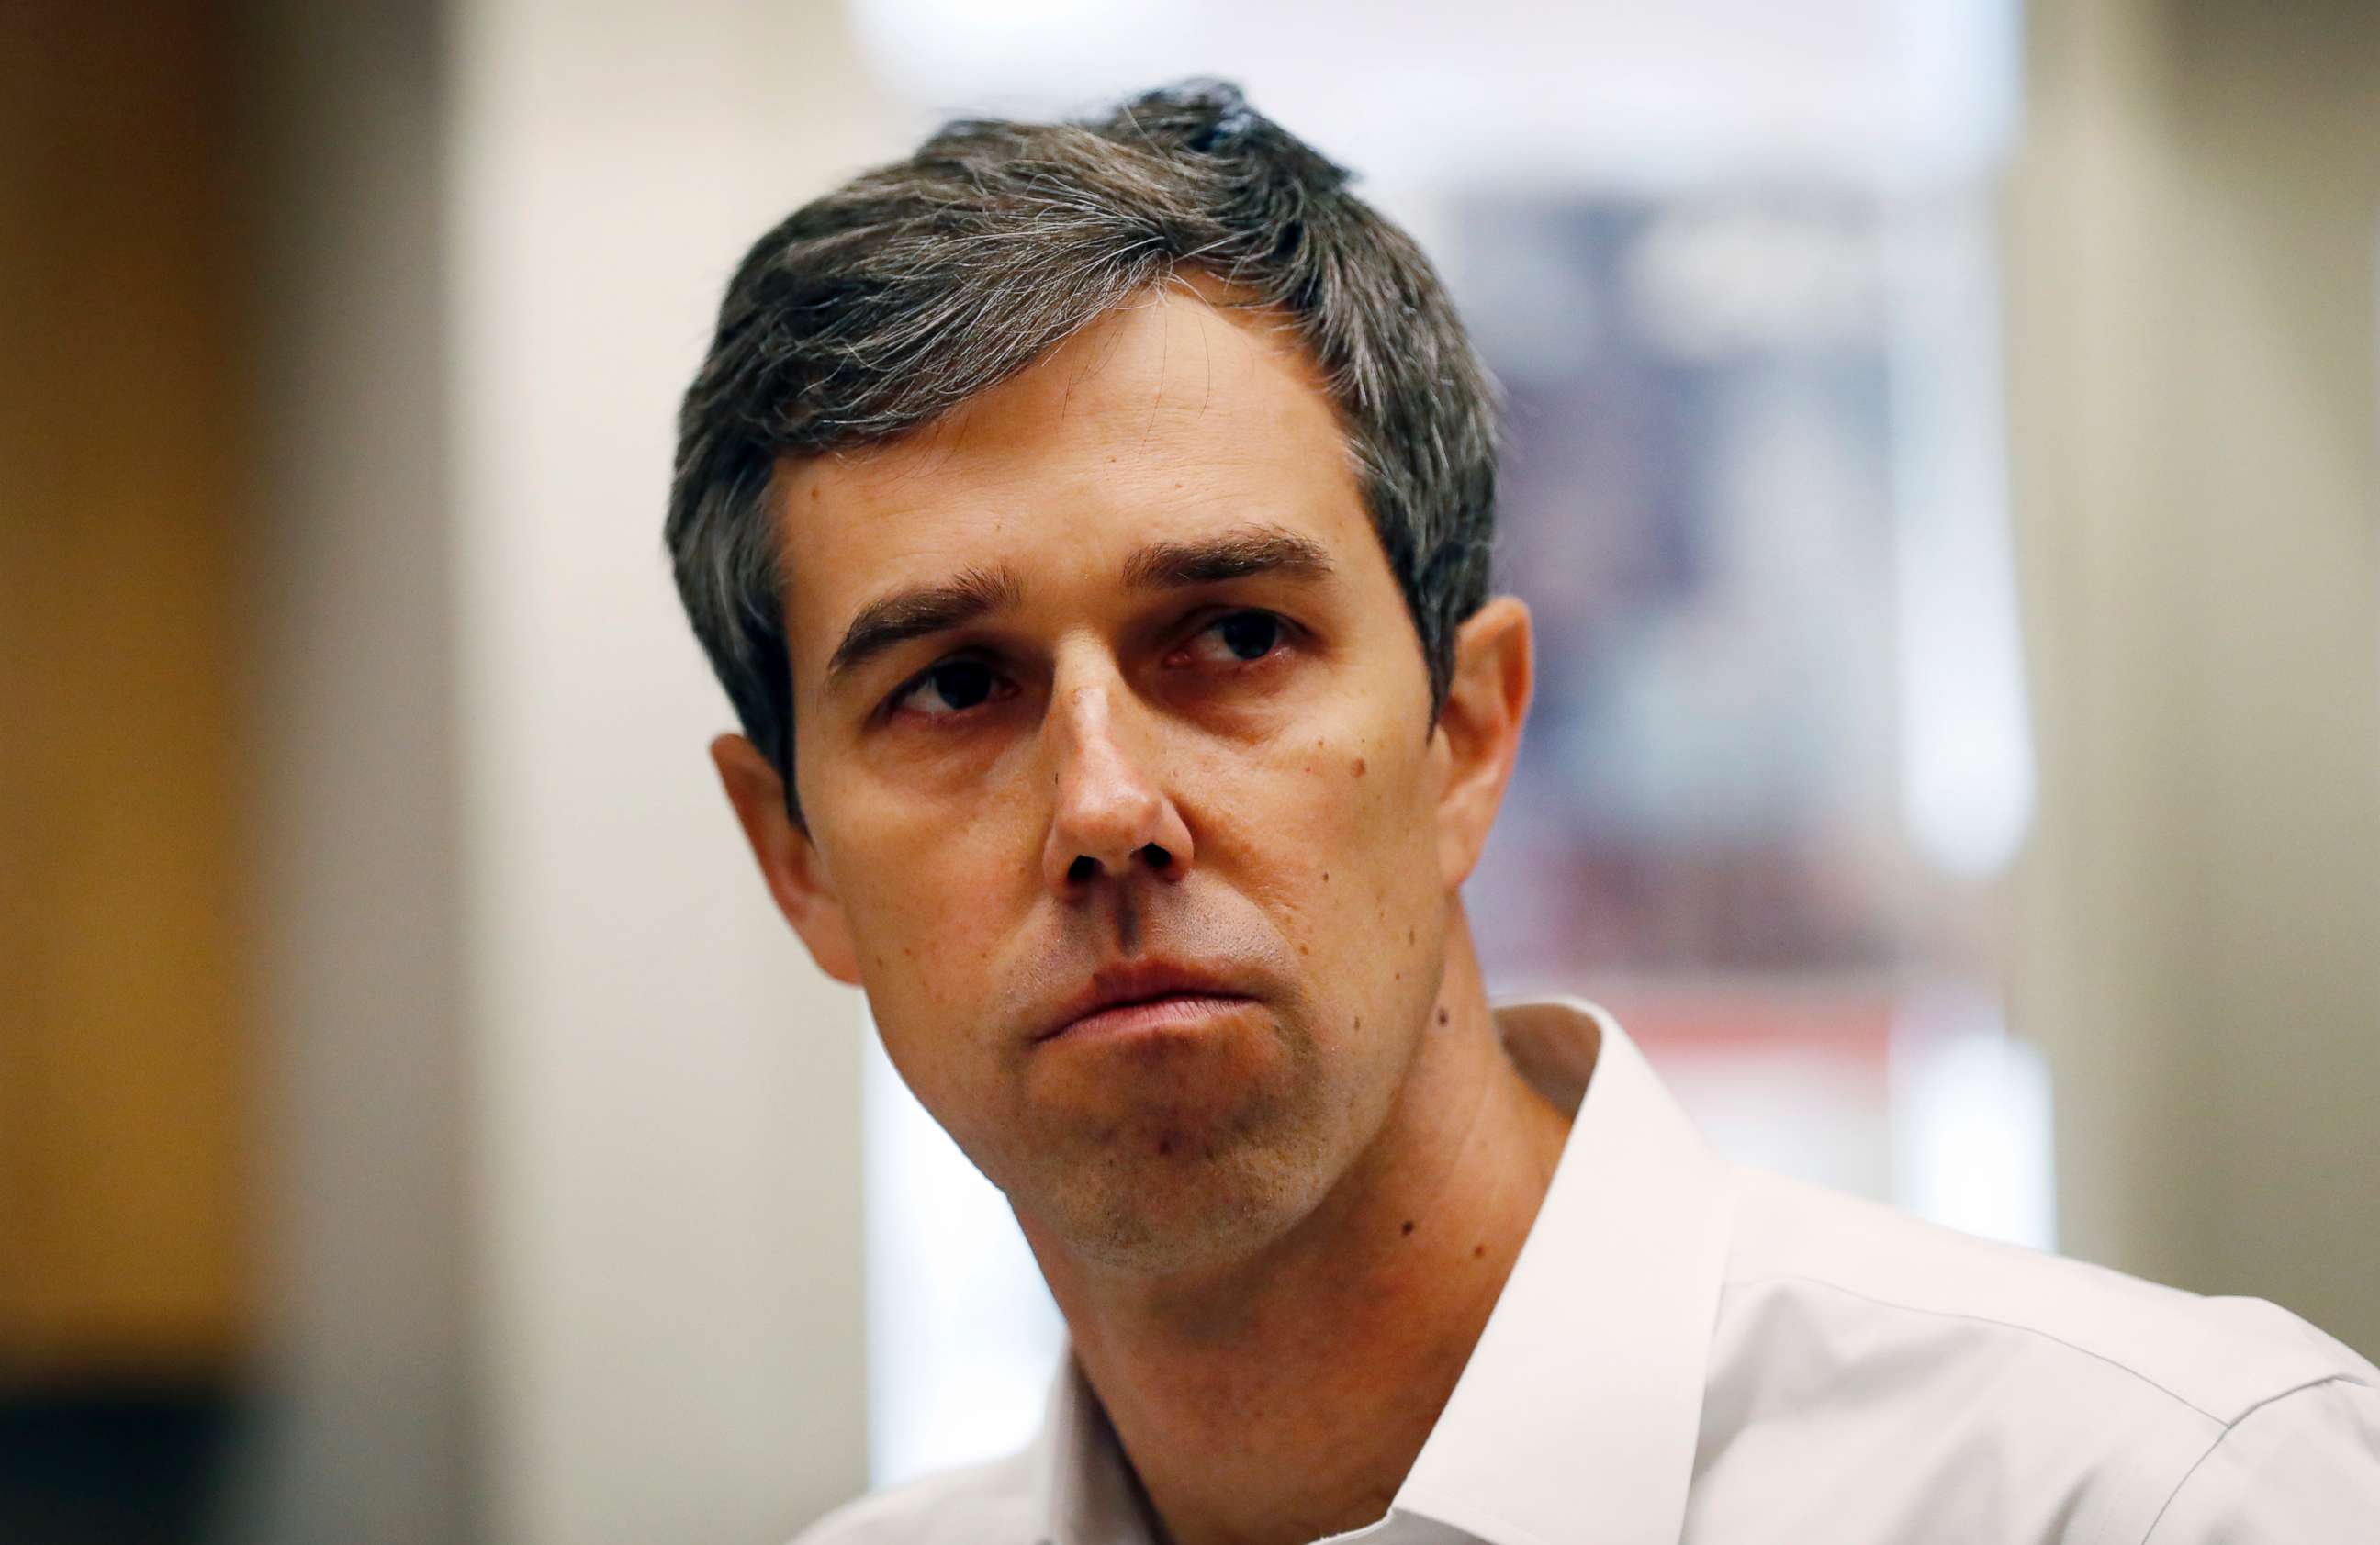 PHOTO: Former Texas congressman and Democratic presidential candidate Beto O'Rourke during a stop at the Michigan Regional Council of Carpenters, March 18, 2019, in Ferndale, Mich.